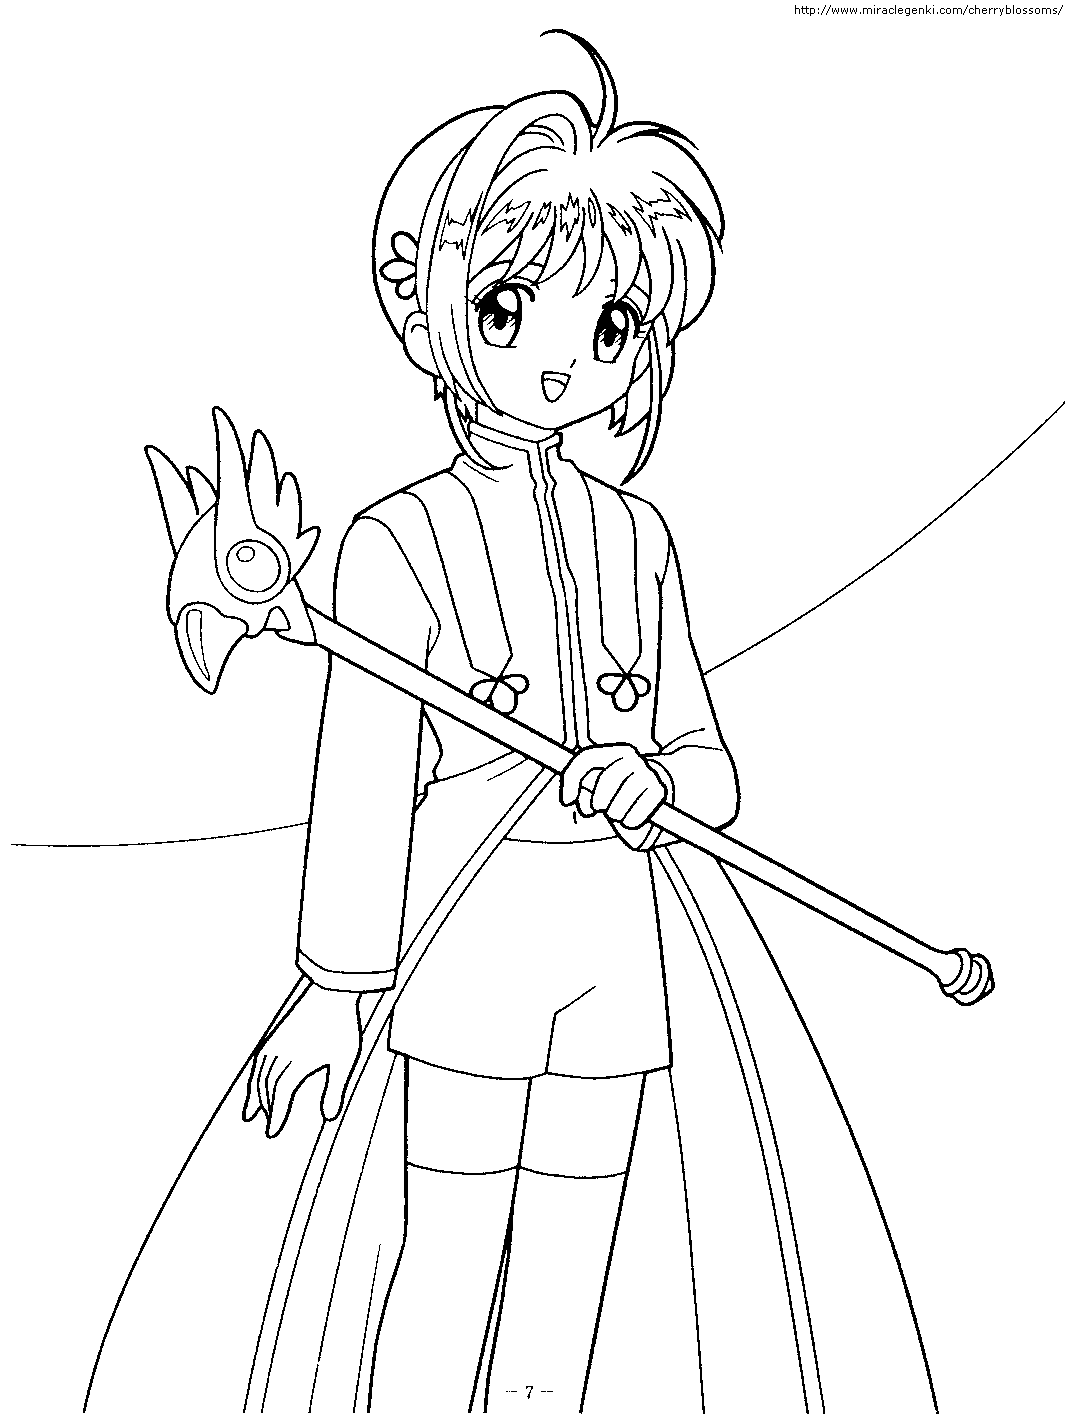 Cardcaptor Sakura Coloring Page | Coloring Pages of Epicness ...